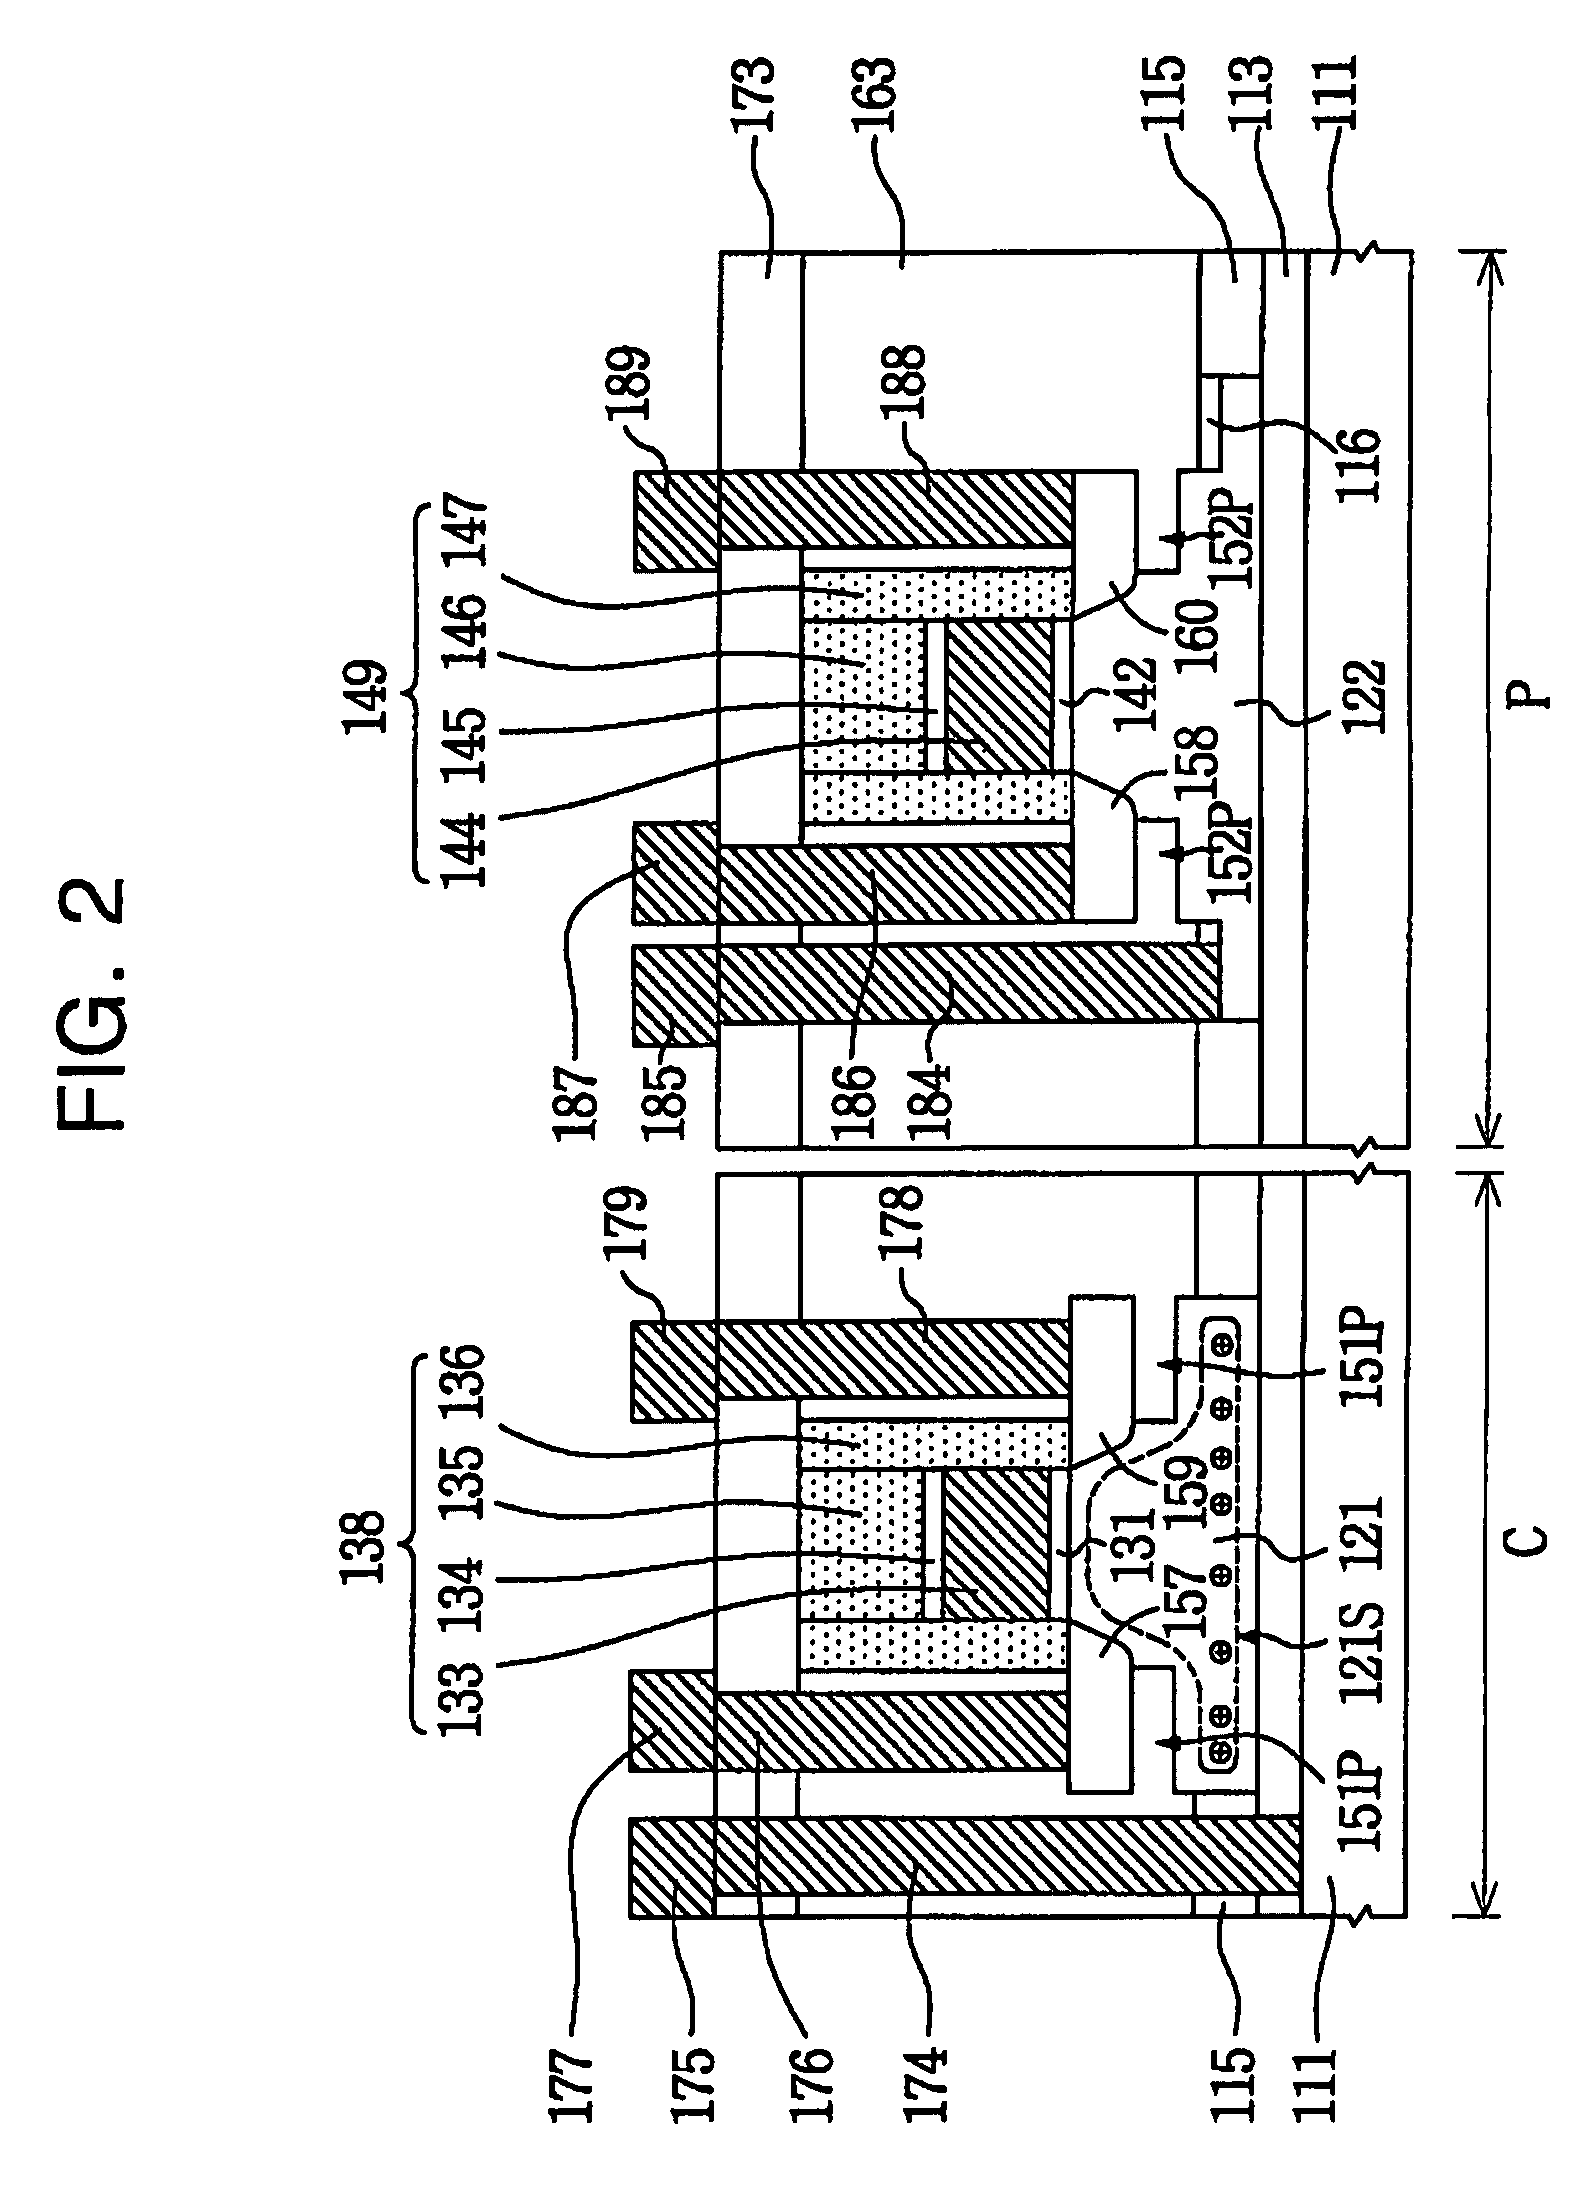 Floating body memory and method of fabricating the same